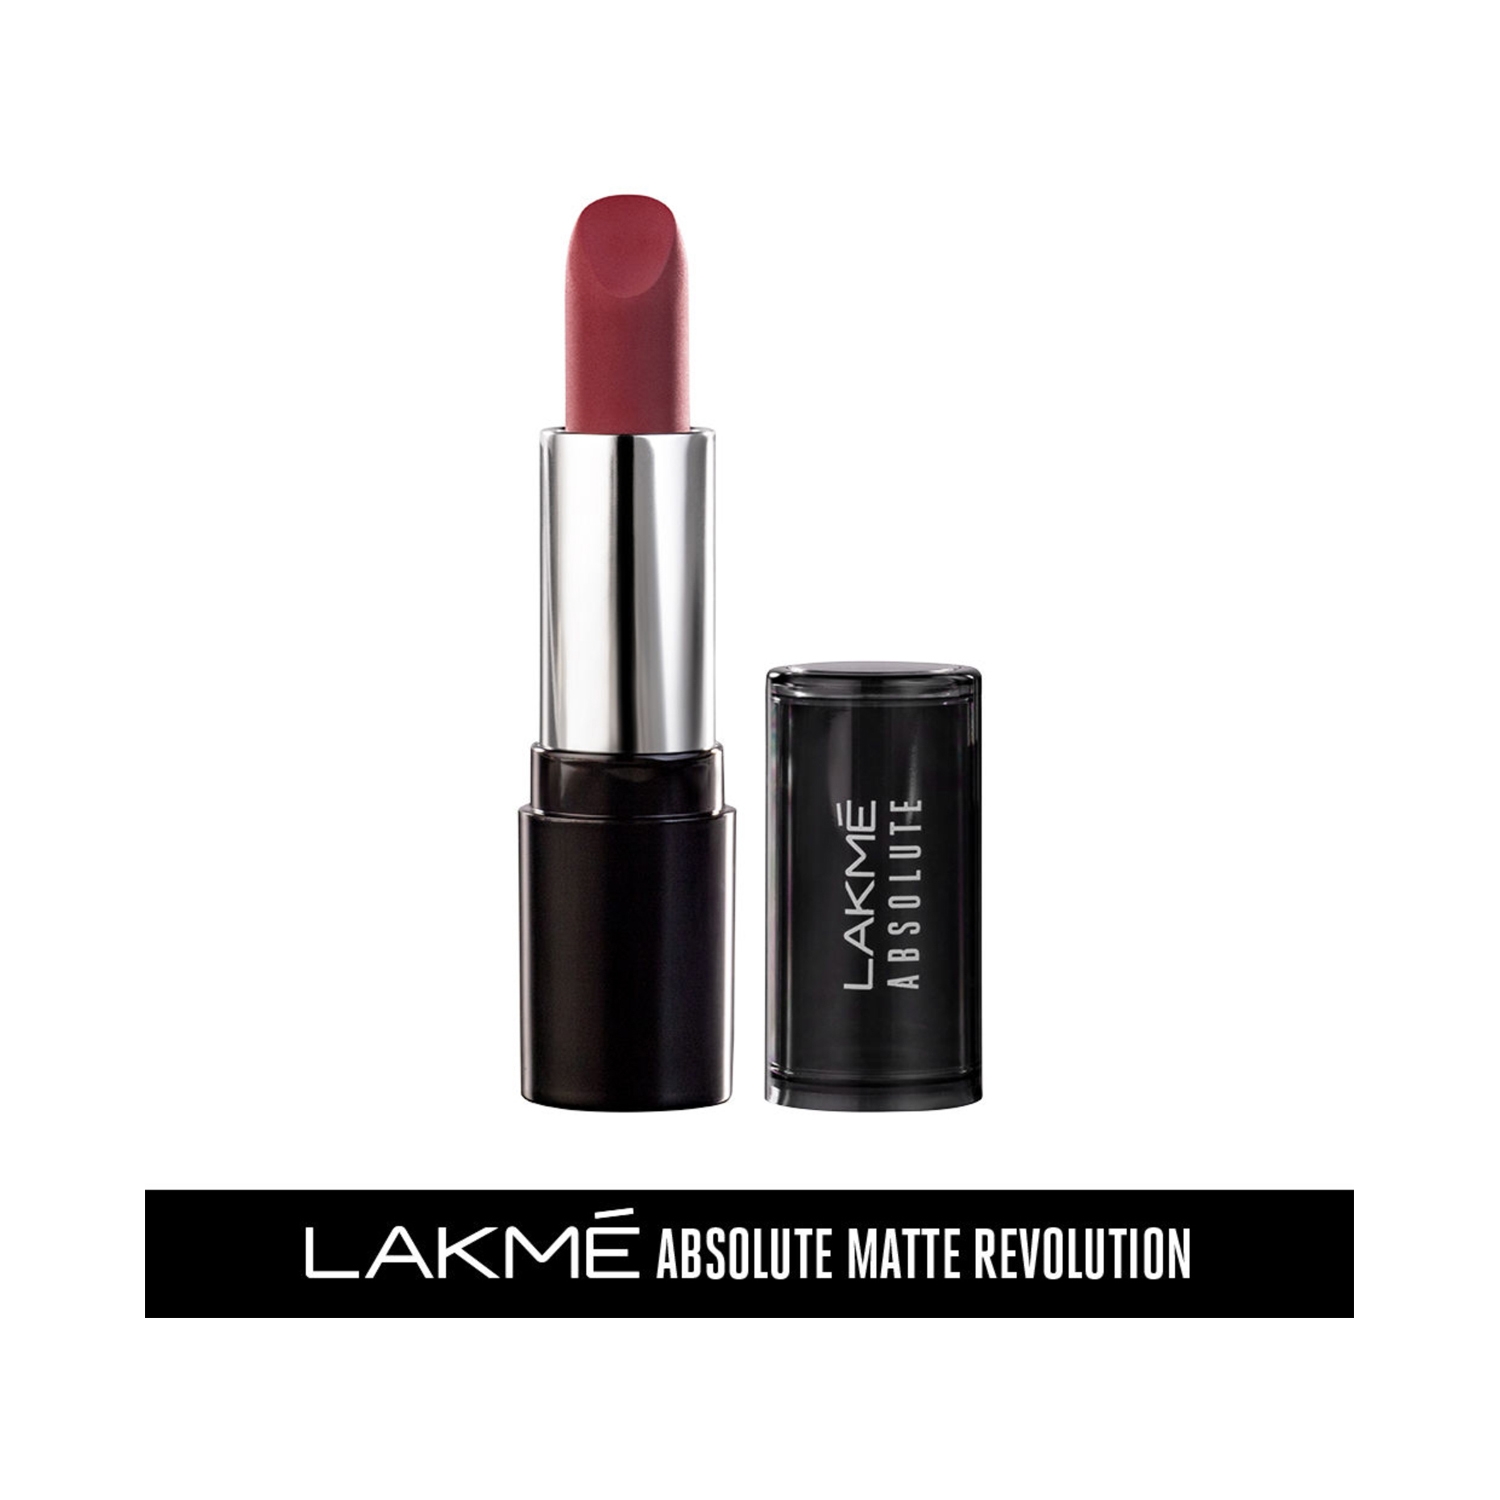 Lakme | Lakme Absolute Matte Revolution Lip Color - 306 Nutty Chocolate (3.5g)